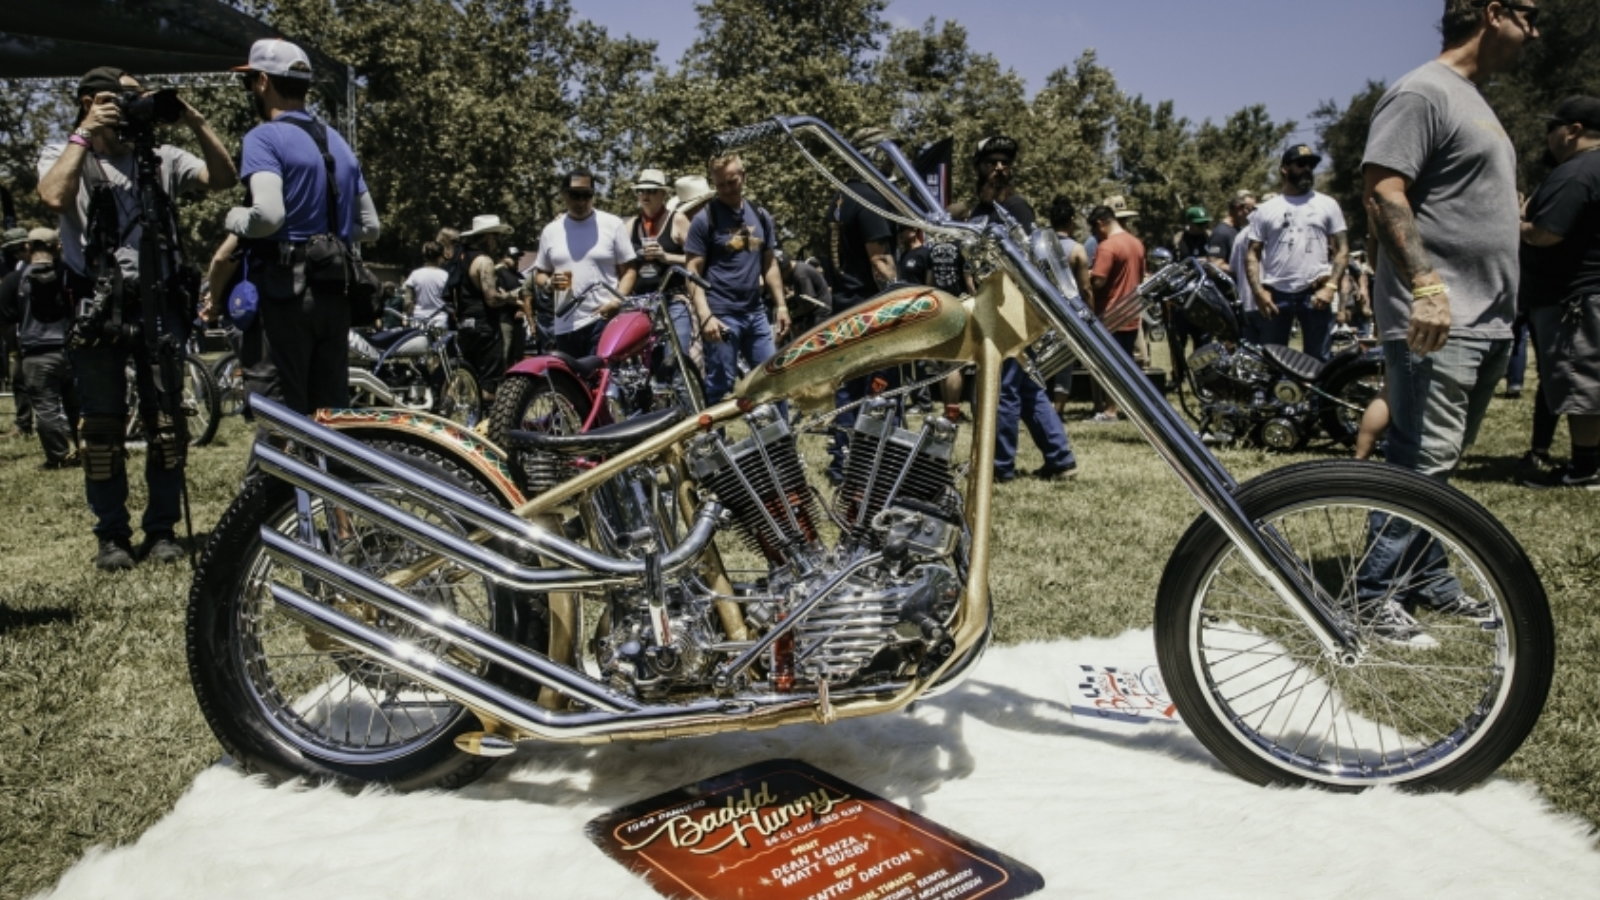 Born Free Motorcycle Show Coverage | Hdforums